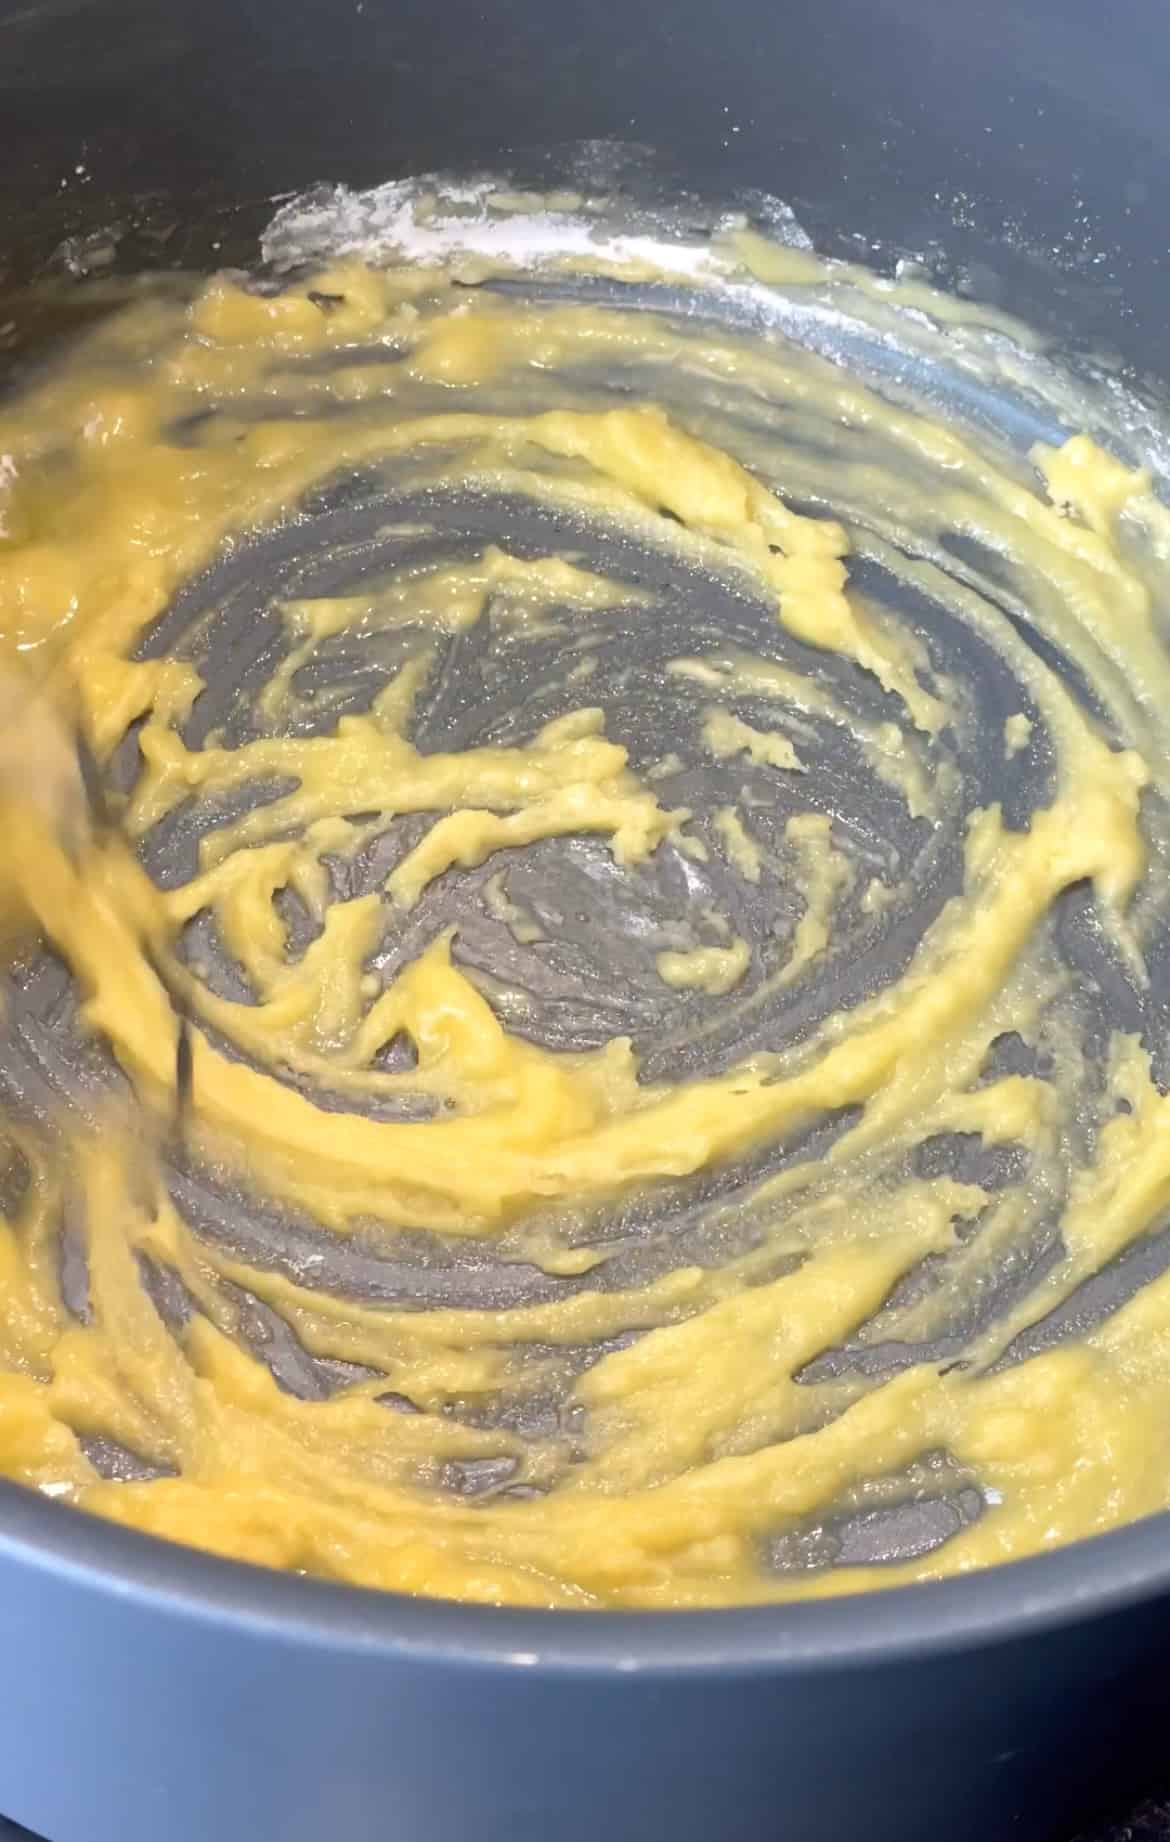 Mixing the flour, egg yolk and oil together in a bowl